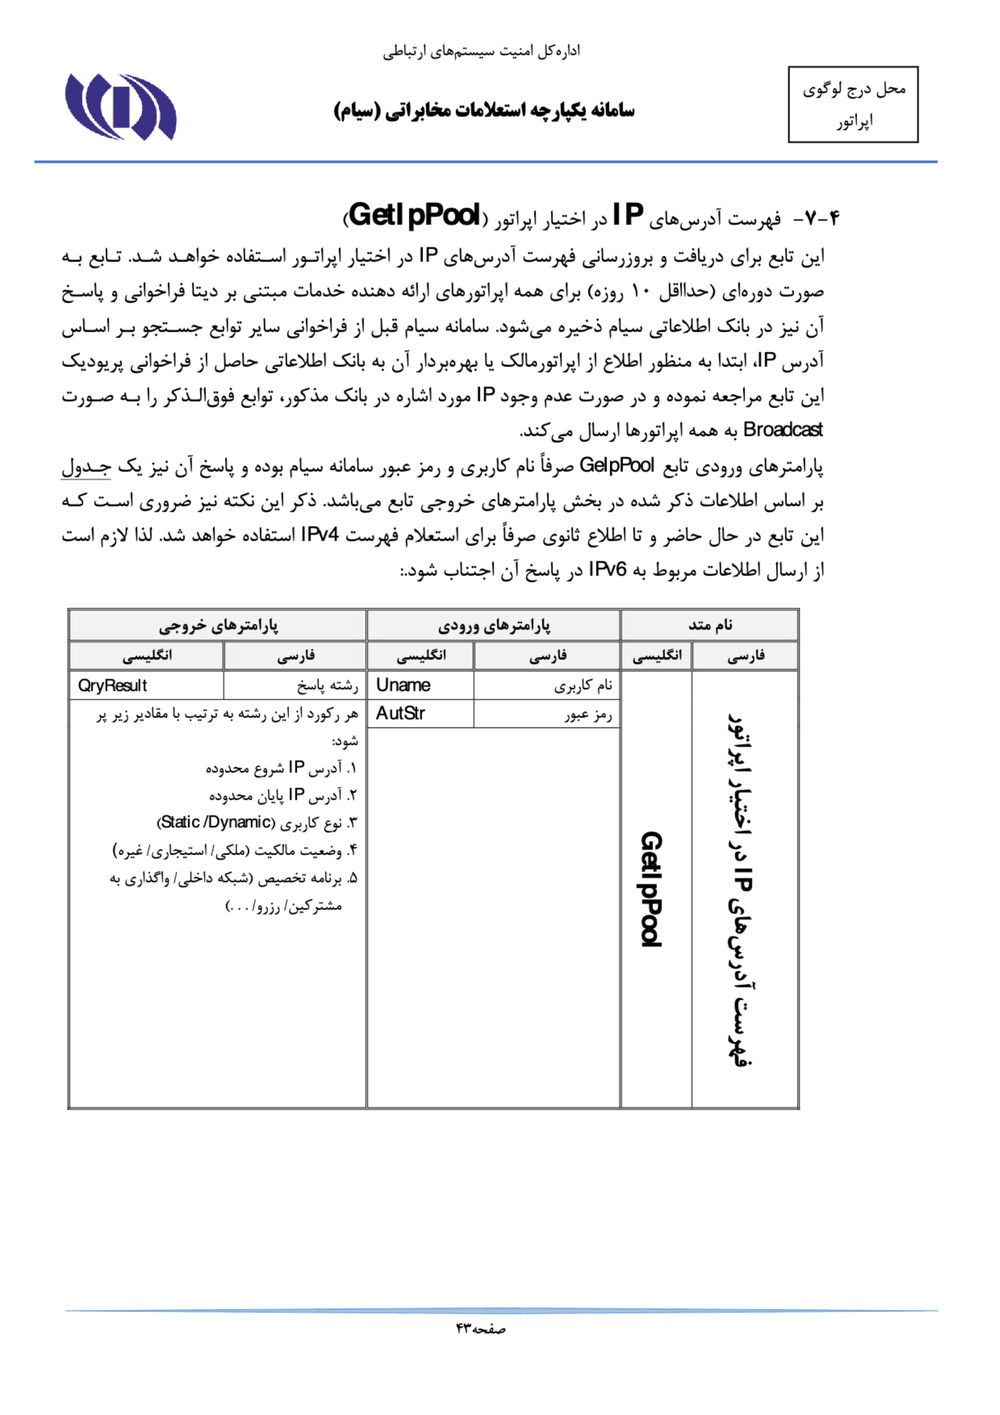 Page 43 from Iran’s SIAM Manual in Persian for Tracking and Controlling Mobile Phones